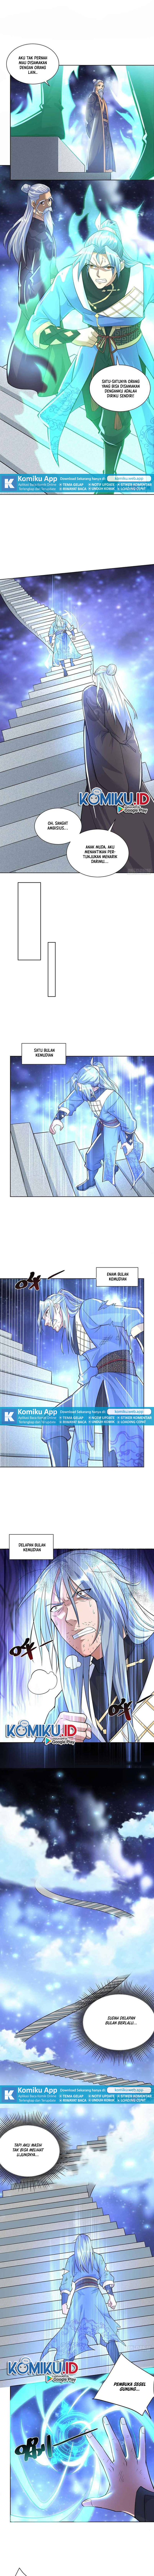 Rebirth After 80.000 Years Passed Chapter 253